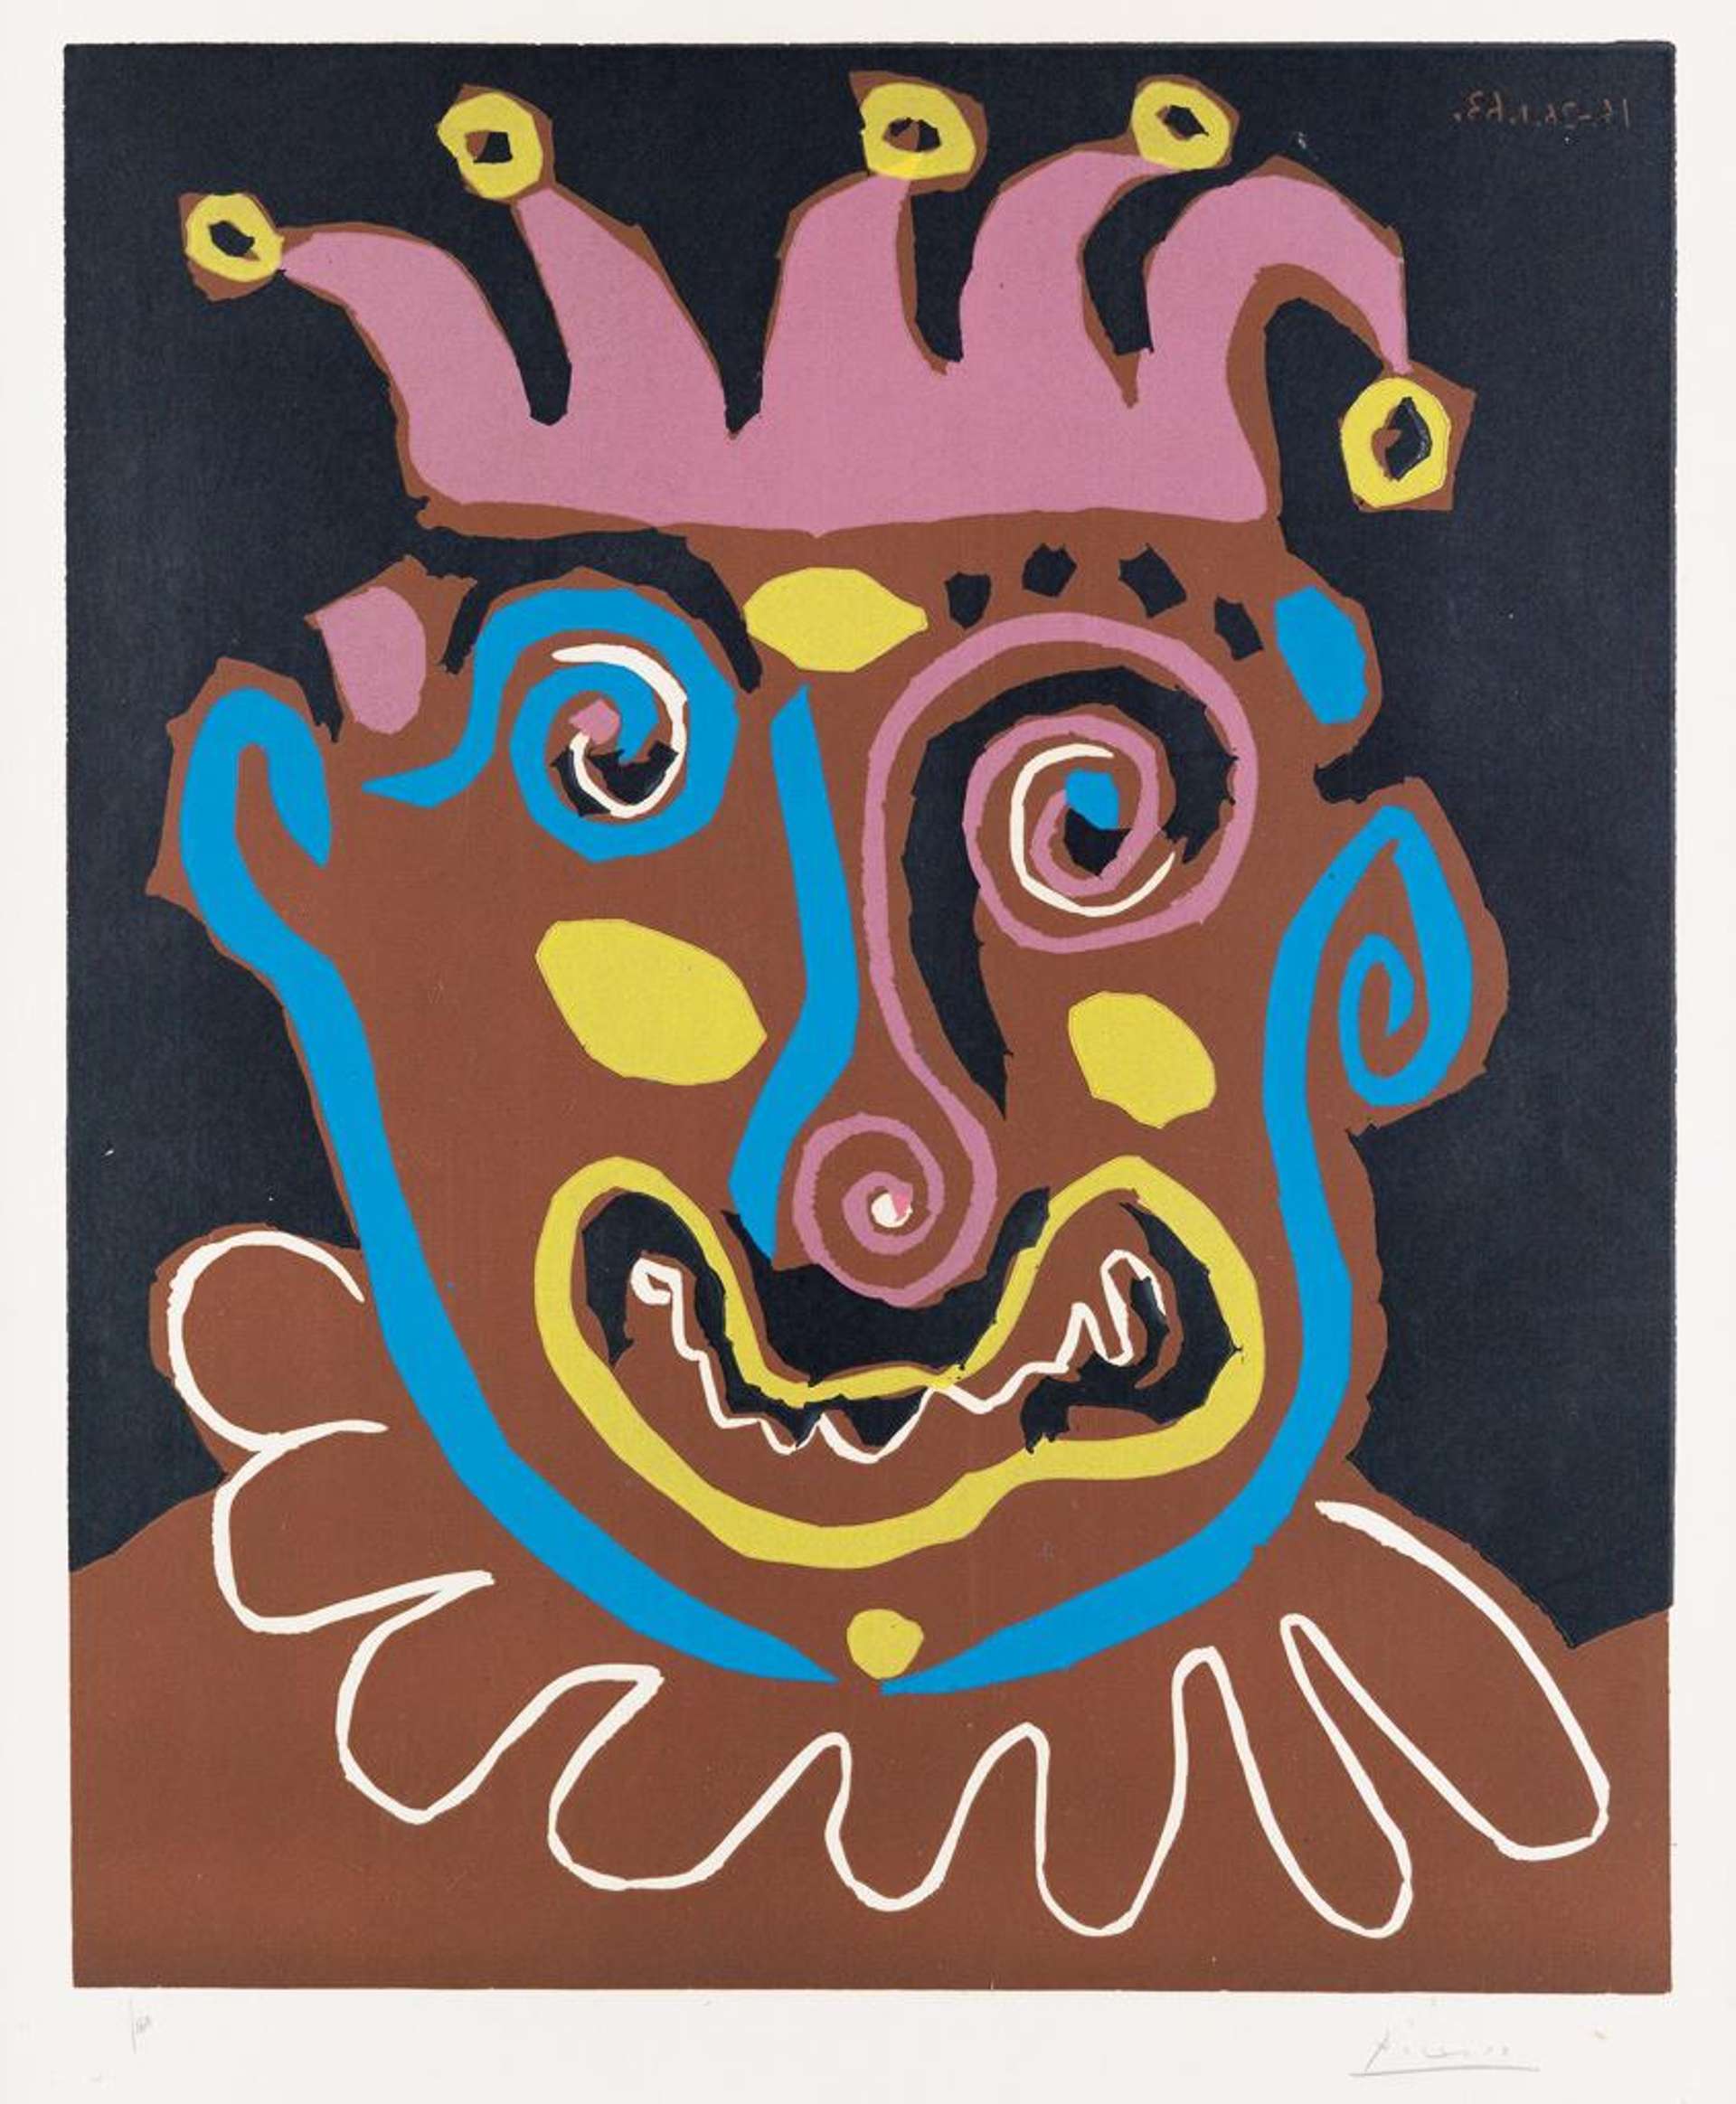 An image of the print Le Vieux Roi by Pablo Picasso. It shows the head of a man, dressed in what could be variously interpreted as either a king's or a jester's clothes. The work is done in bright and bold colours.